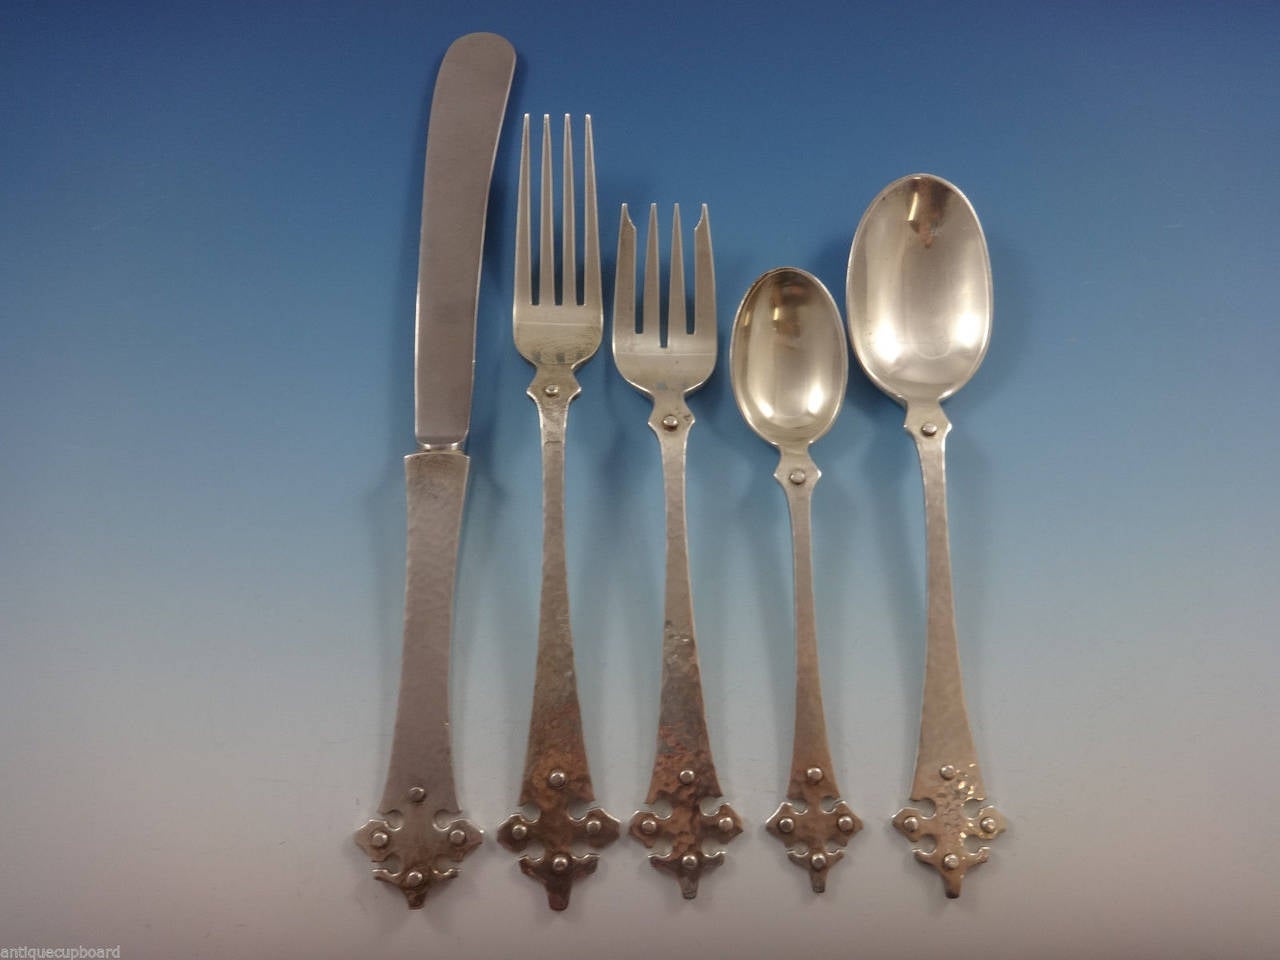 Old Newbury Crafters silver is genuinely handmade and wonderfully heavy, the machine cannot match the quality, durability, look and feel of handmade silver. The subtle hammered finish shows silver at its finest. 

Amazing 41 piece set of Crusader